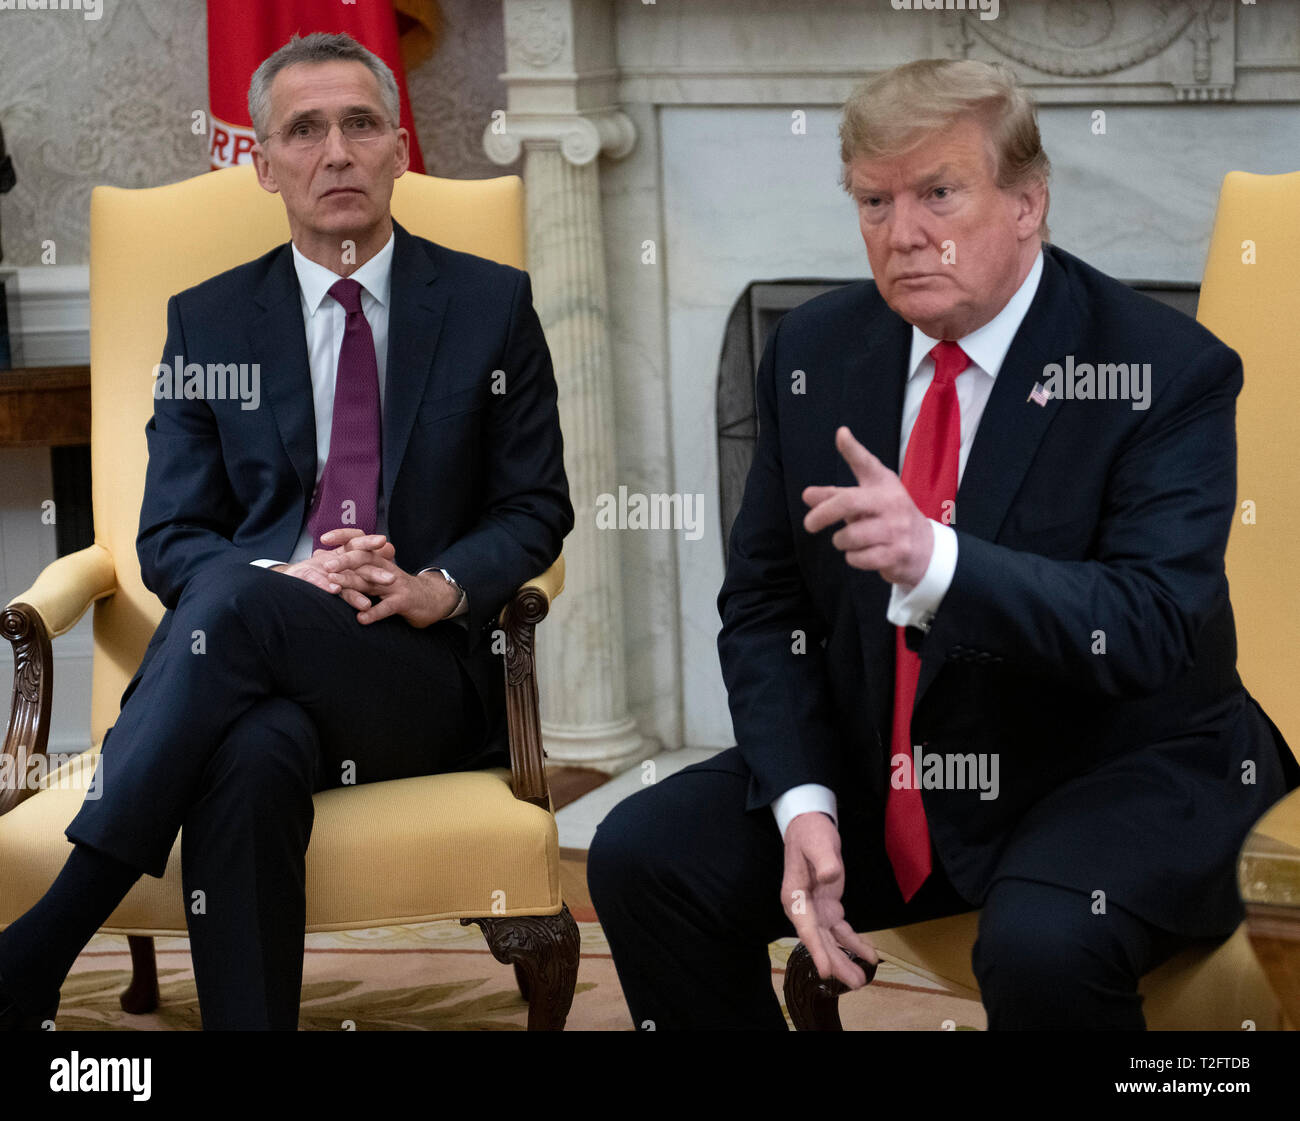 Washington DC, USA. 02nd Apr, 2019. United States President Donald J. Trump meets Jens Stoltenberg, Secretary General of the North Atlantic Treaty Organization (NATO) in the Oval Office of the White House in Washington, DC on Tuesday, April 2, 2019. Credit: Ron Sachs/Pool via CNP /MediaPunch Credit: MediaPunch Inc/Alamy Live News Stock Photo